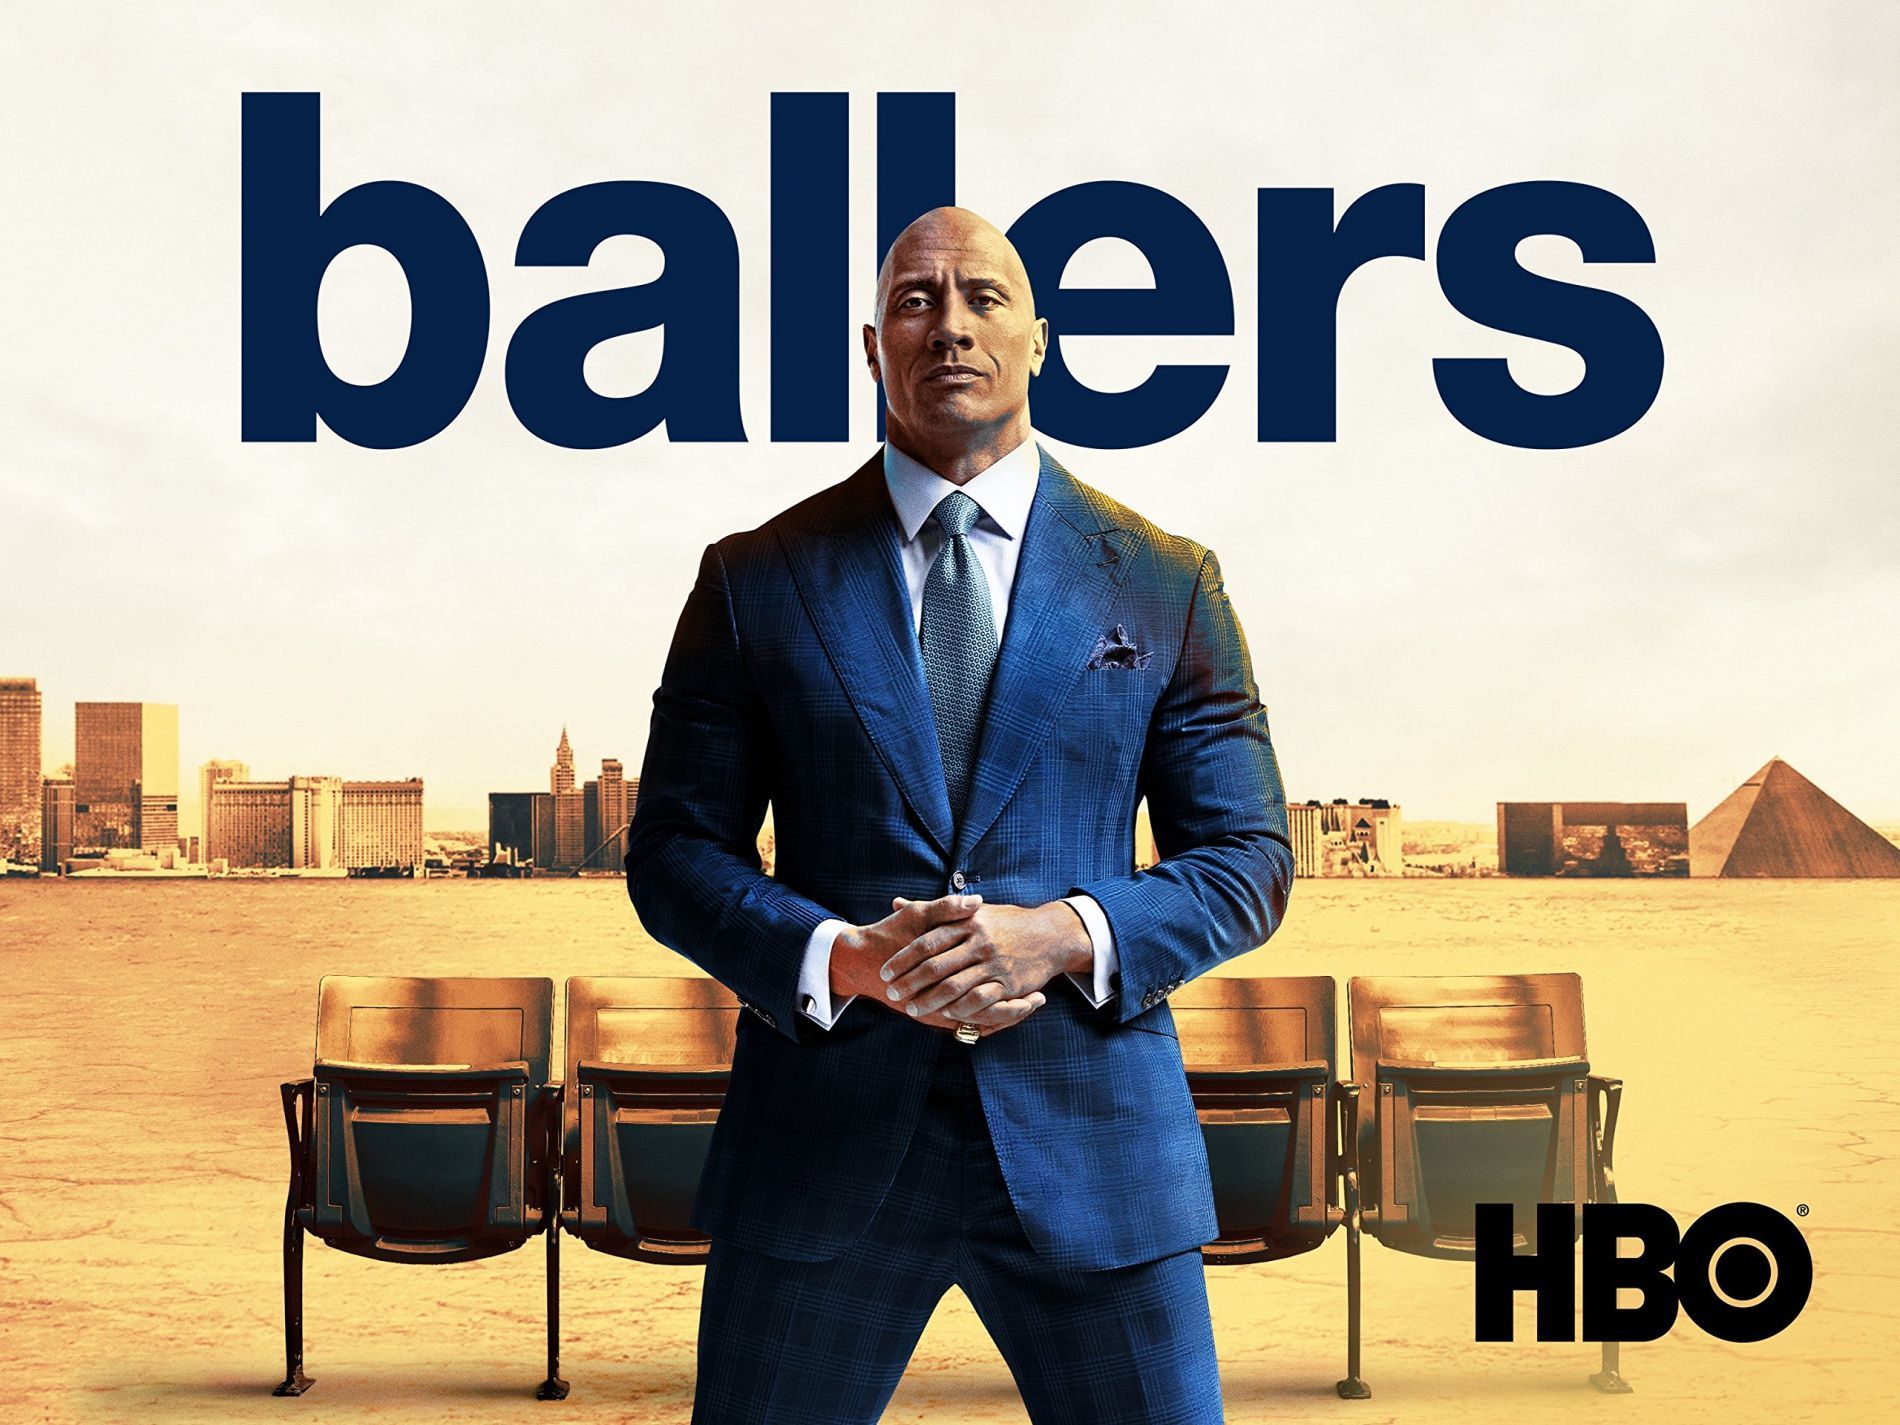 'Bad Bitches' by Onderkoffer in TV Serie 'Ballers'